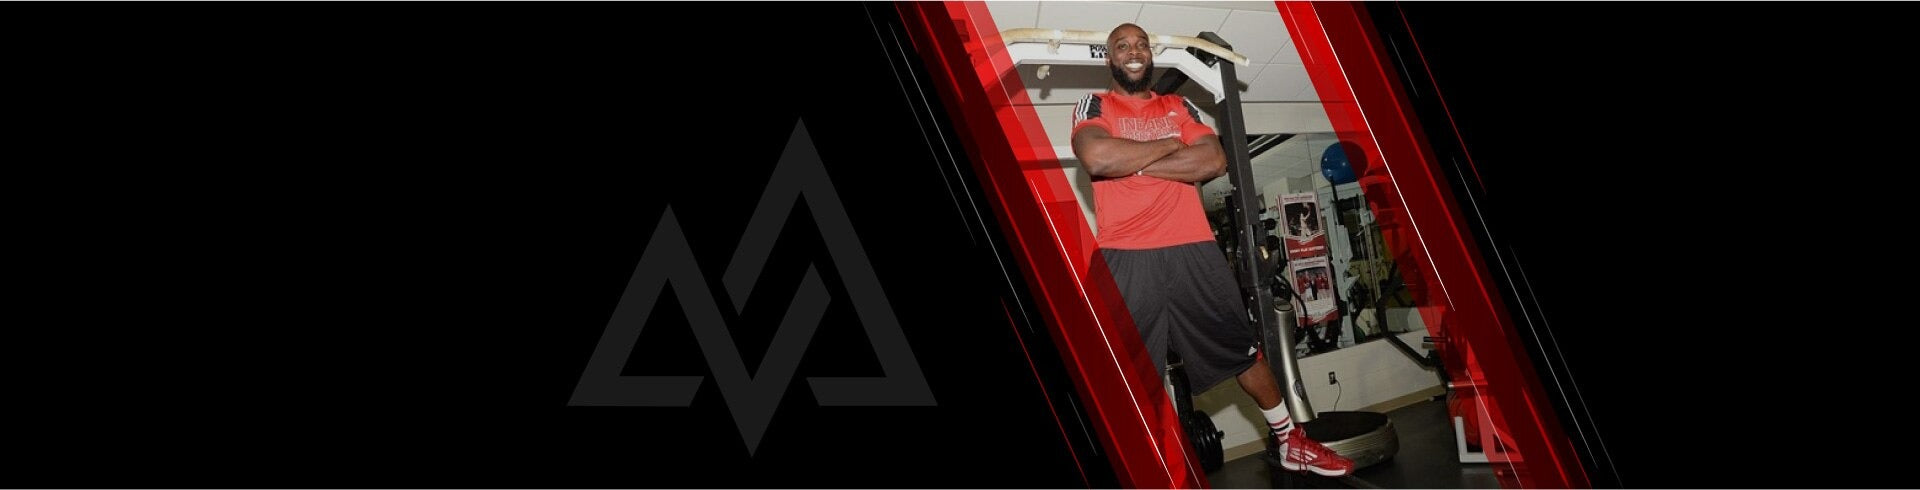 LYONEL ANDERSON Strength and Conditioning Coach Indiana University